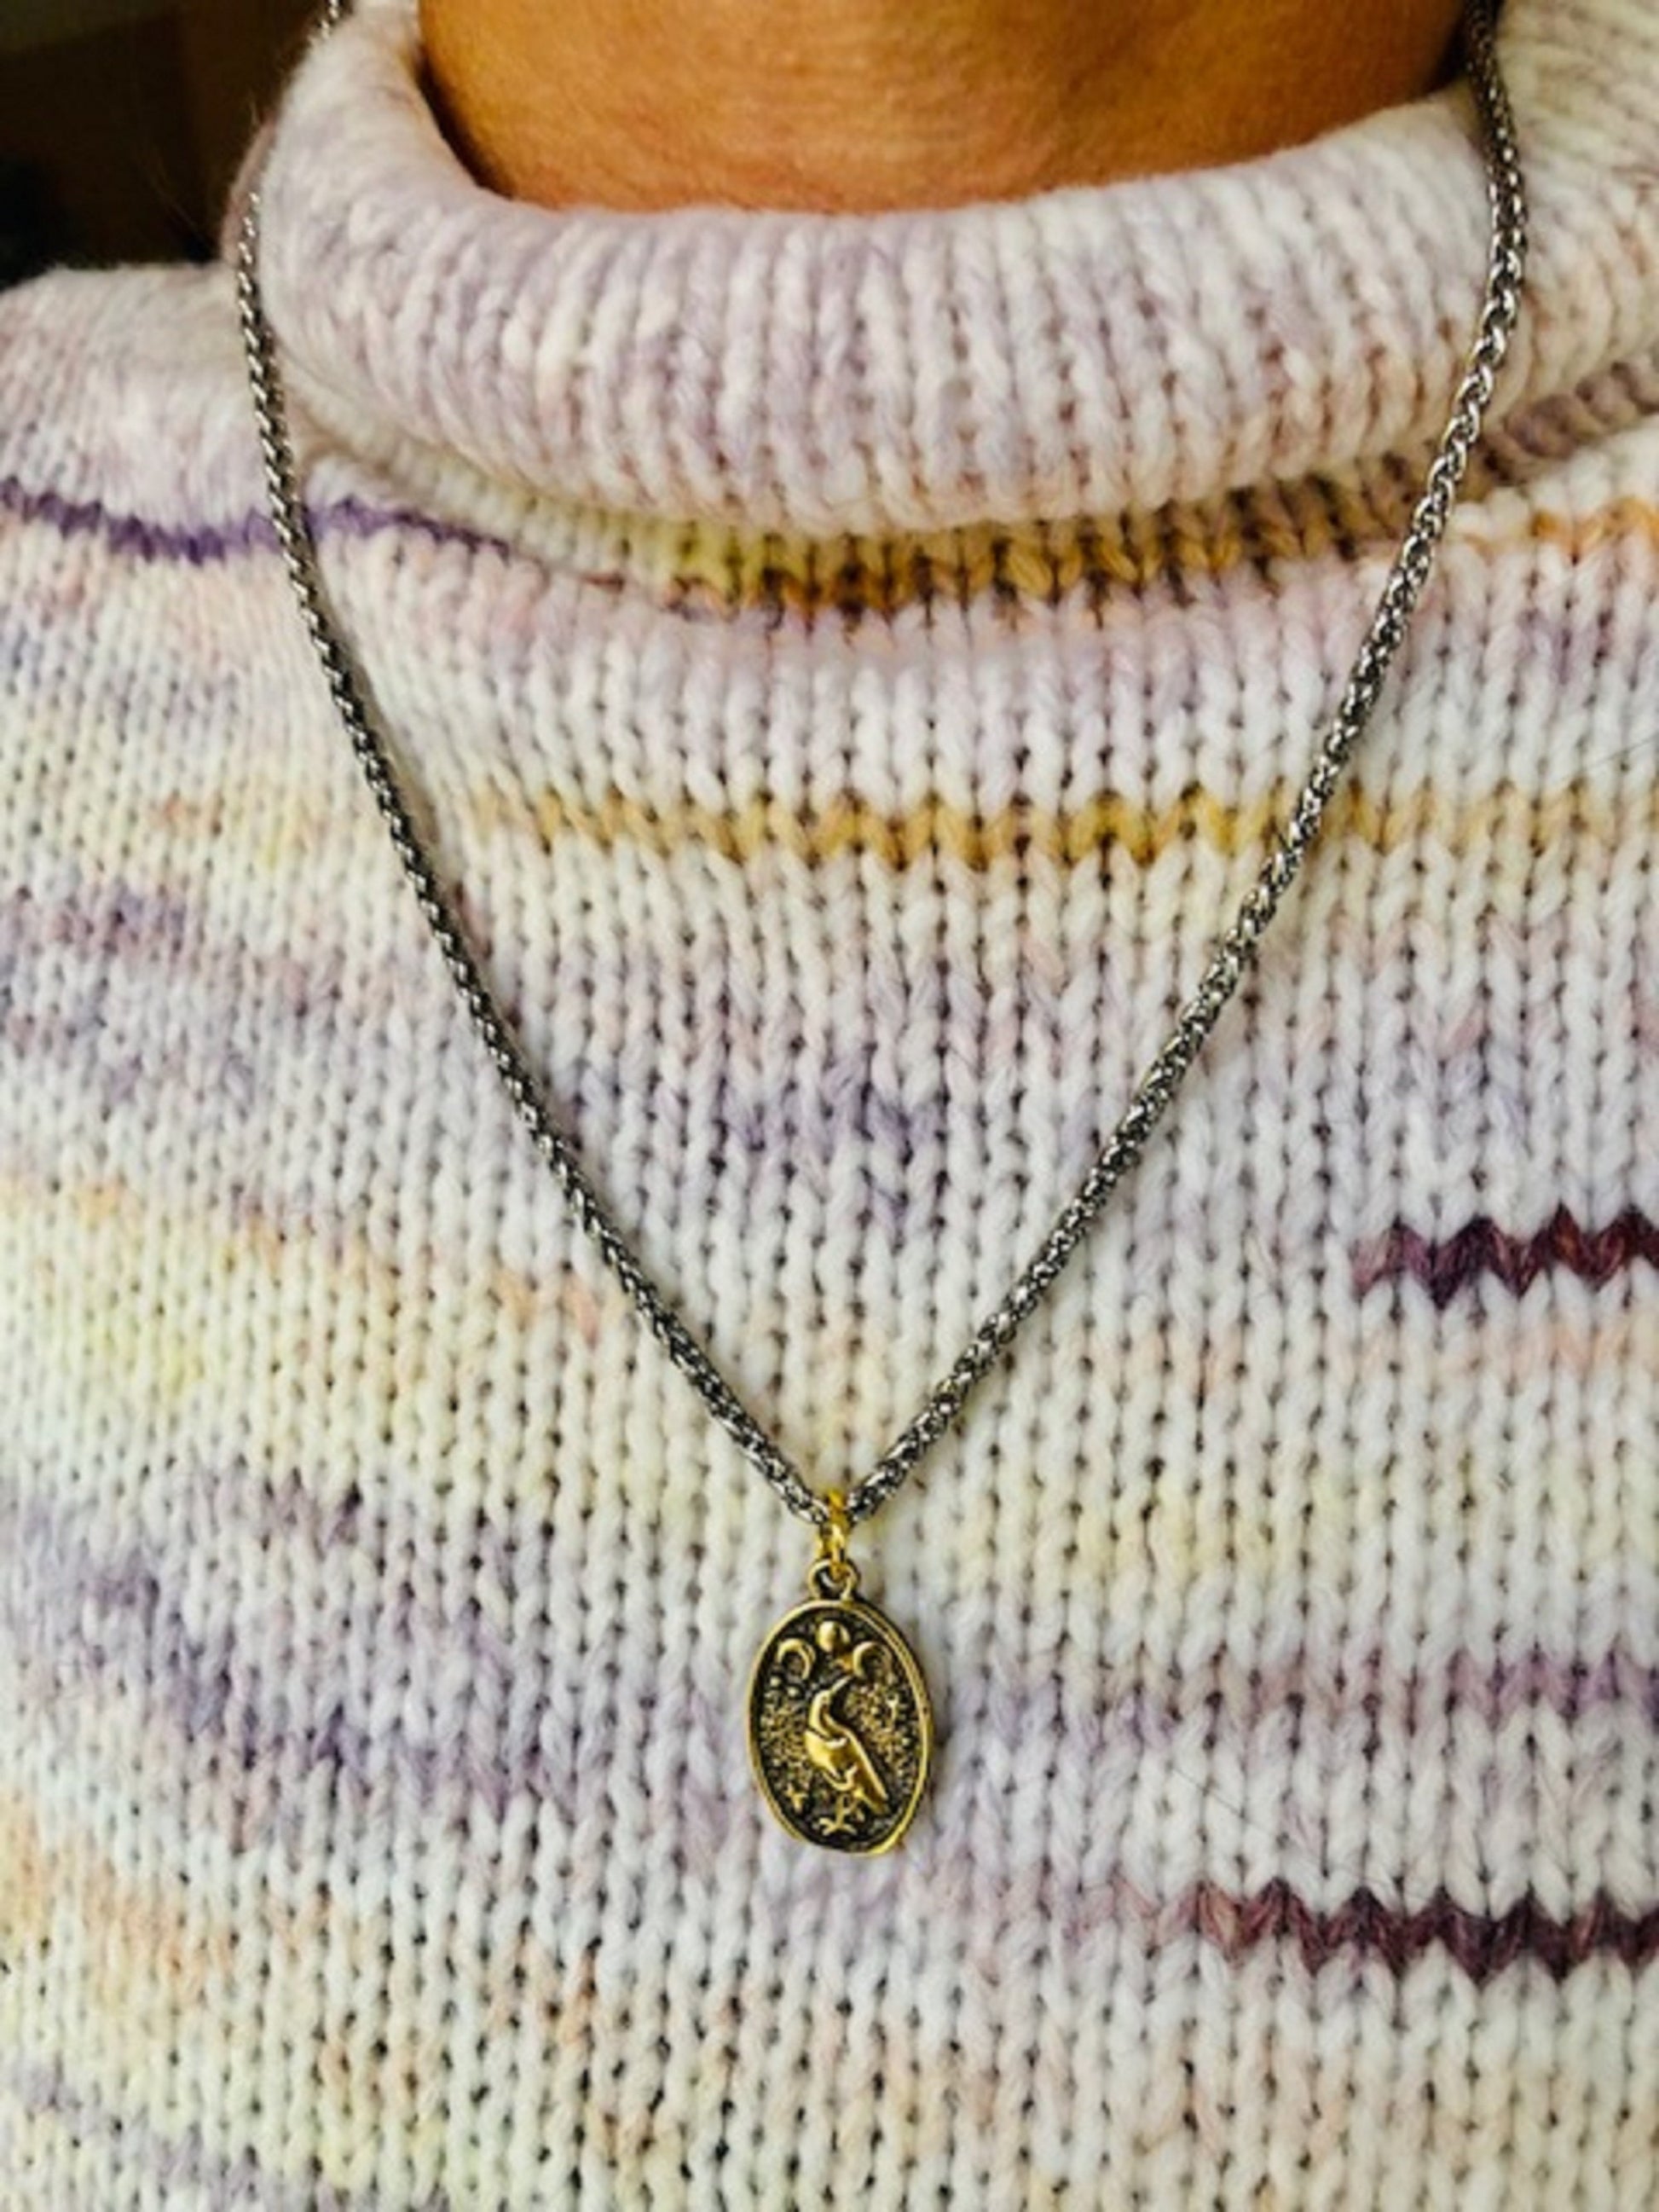 Wax Seal Antique Brass Moon Sun Sparrow Pendant - Transformation, Comfort, Peace - Jewelry from an Antique Wax Seal - Charm Fascinations 129